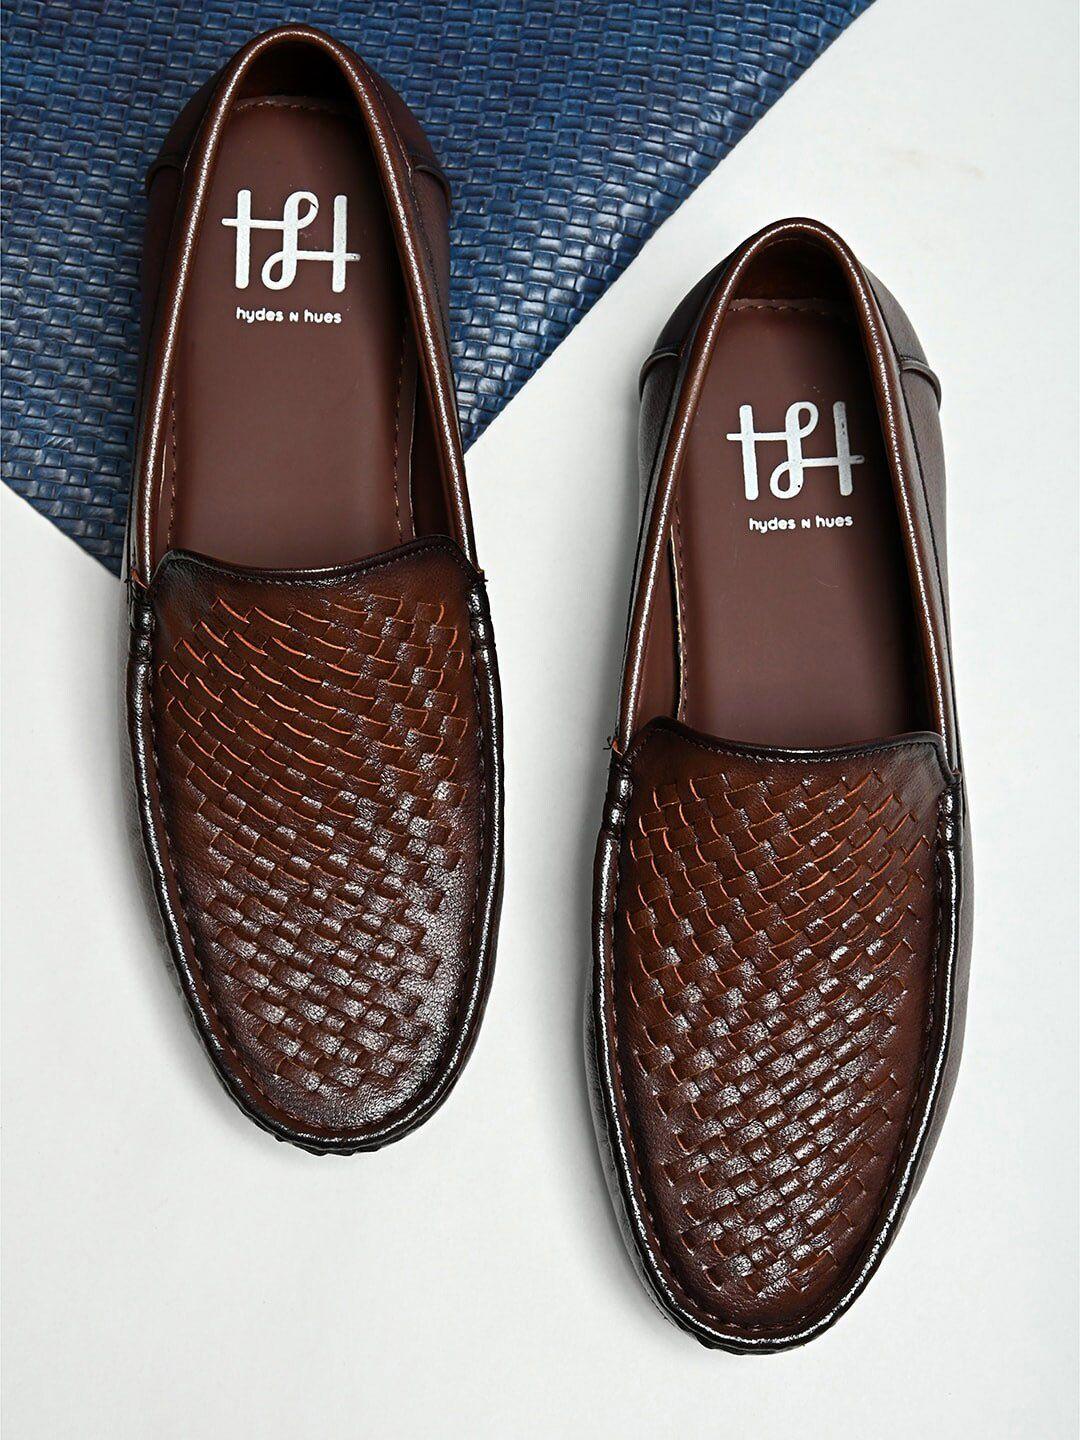 hydes n hues men textured loafers